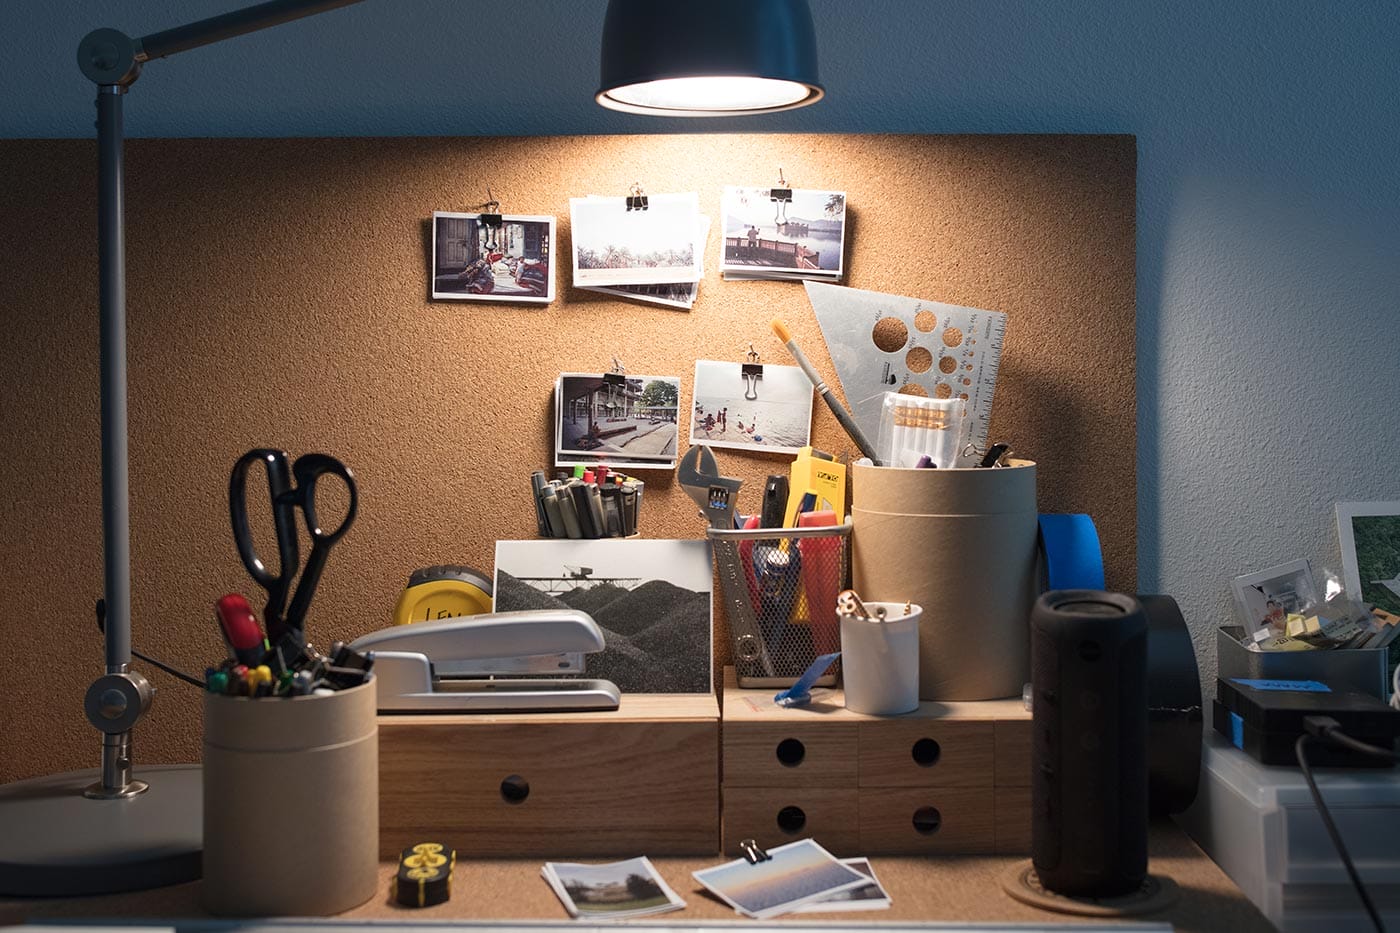 Architectural photos and tools on James Leng's desk.